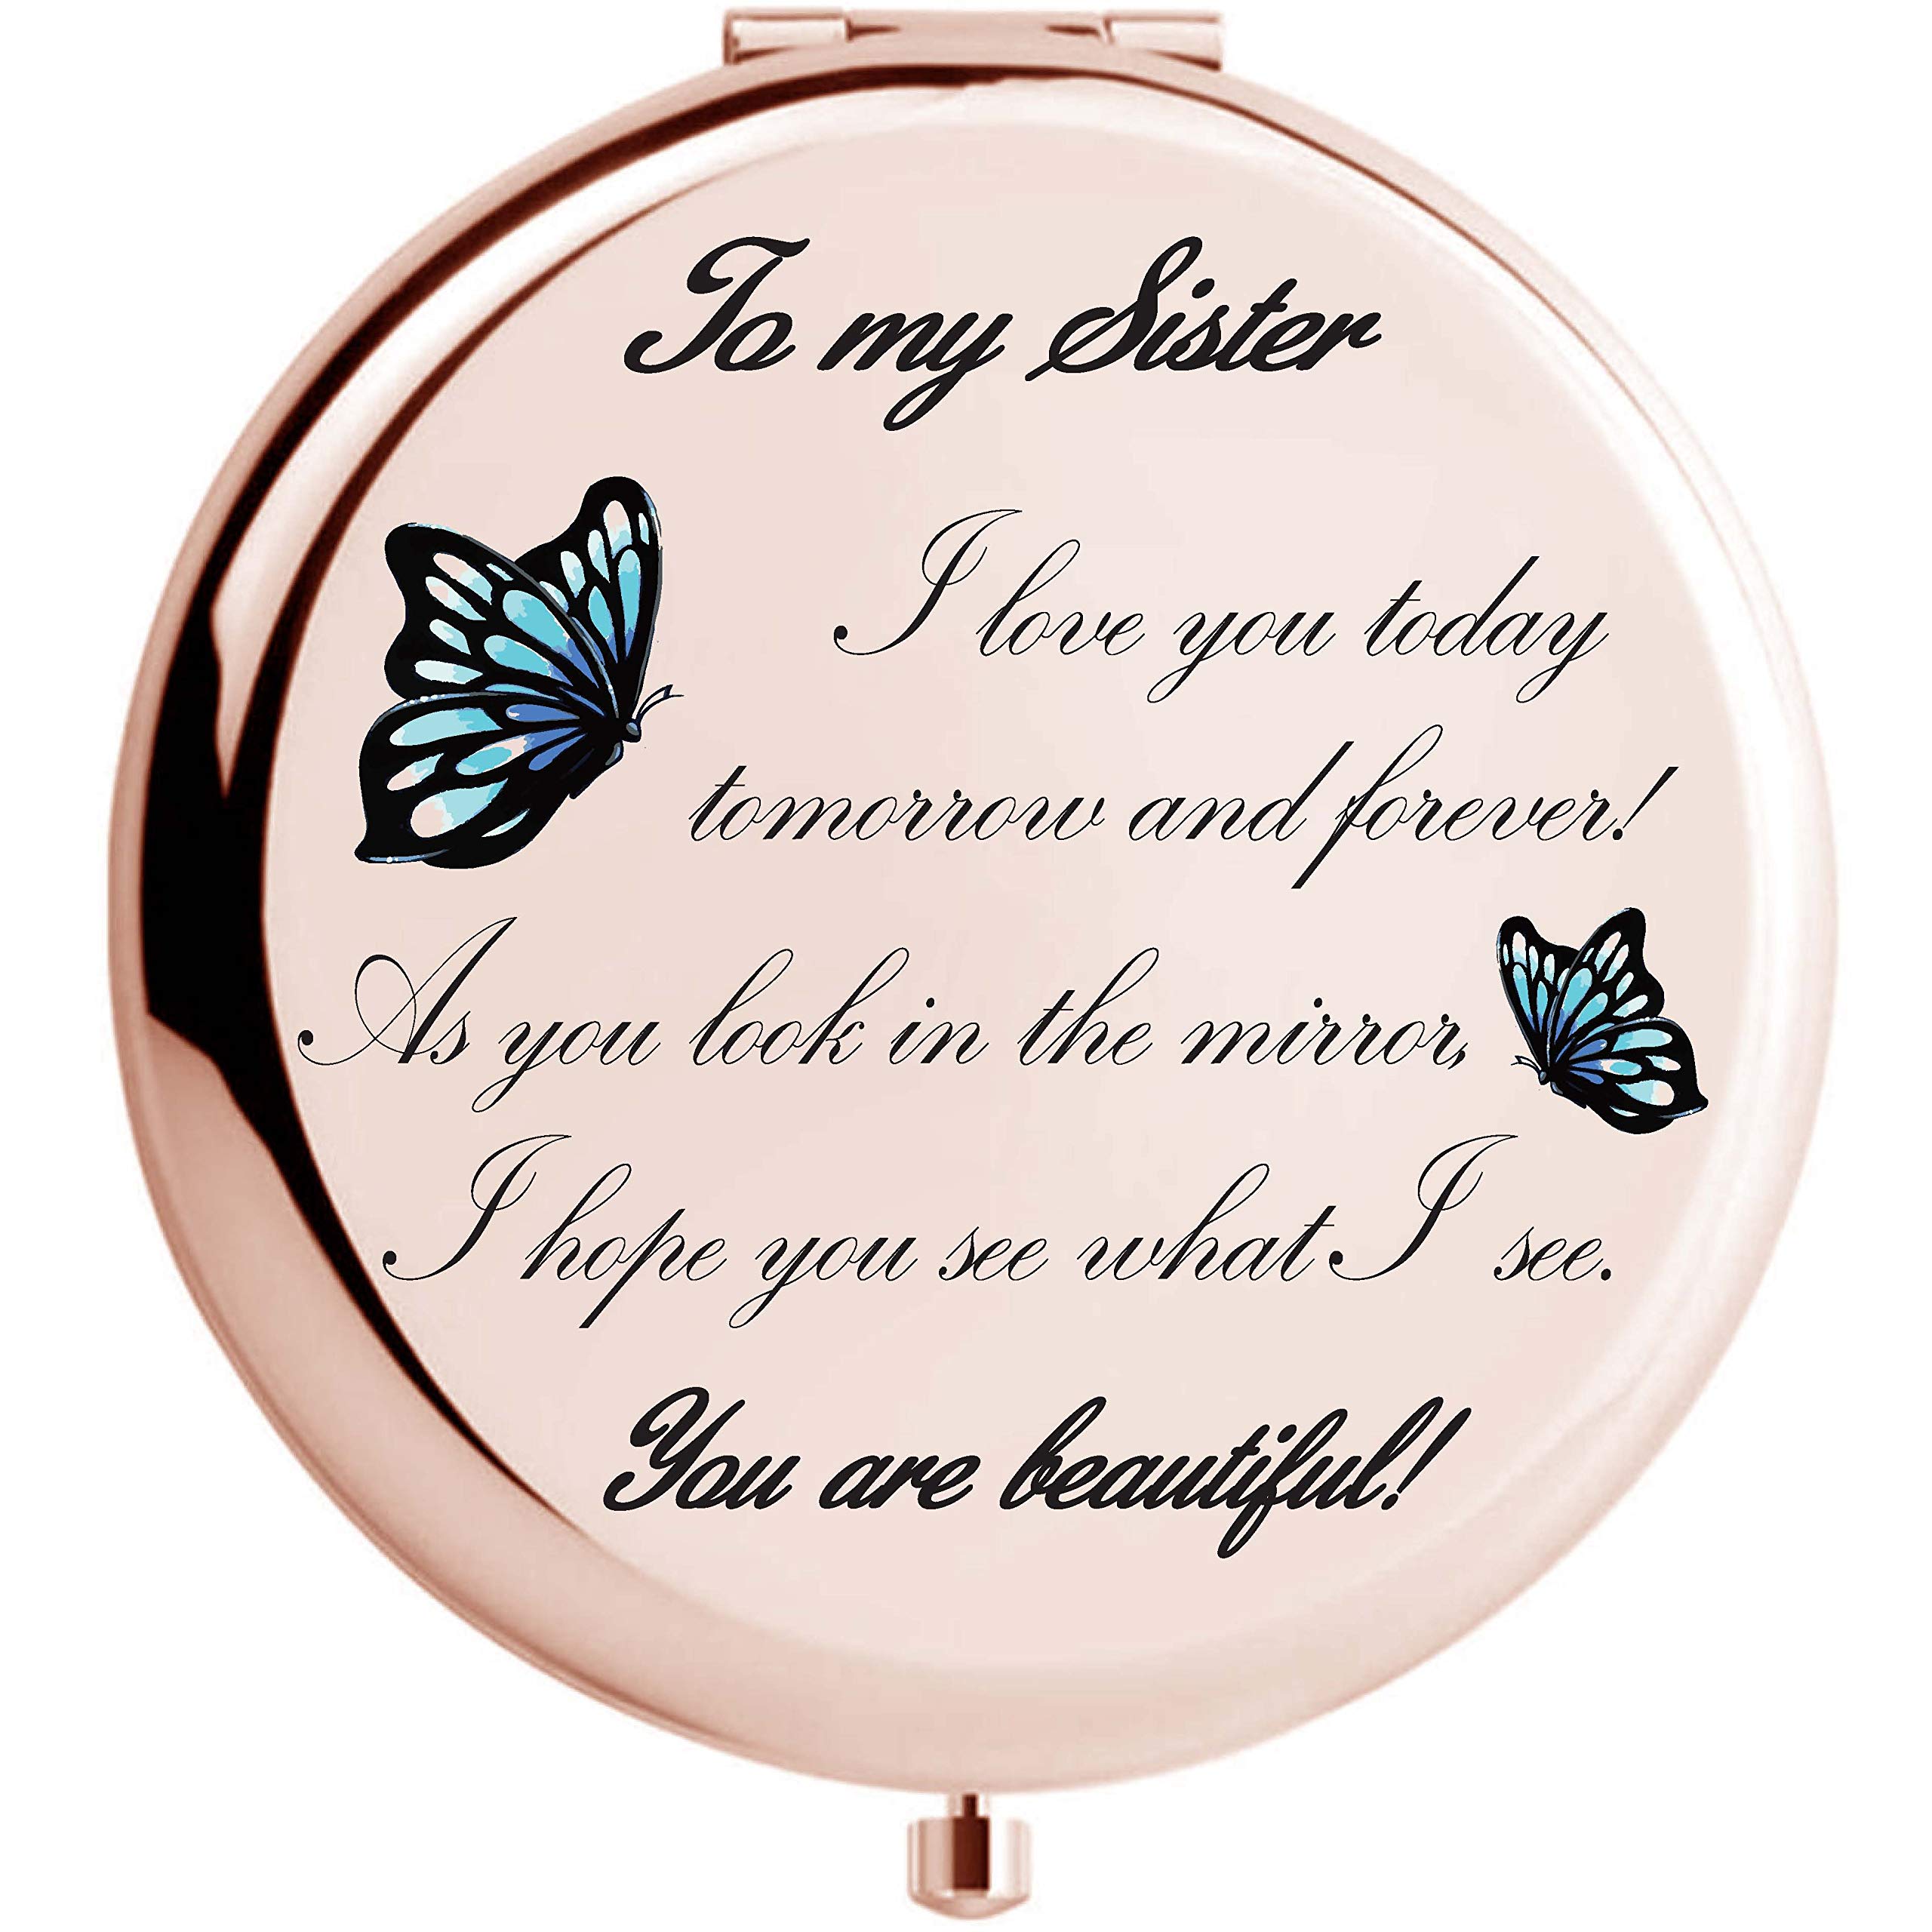 Gifts for Sister to My Sister Gifts Acrylic Night Light Sister Birthday Gift  I | eBay